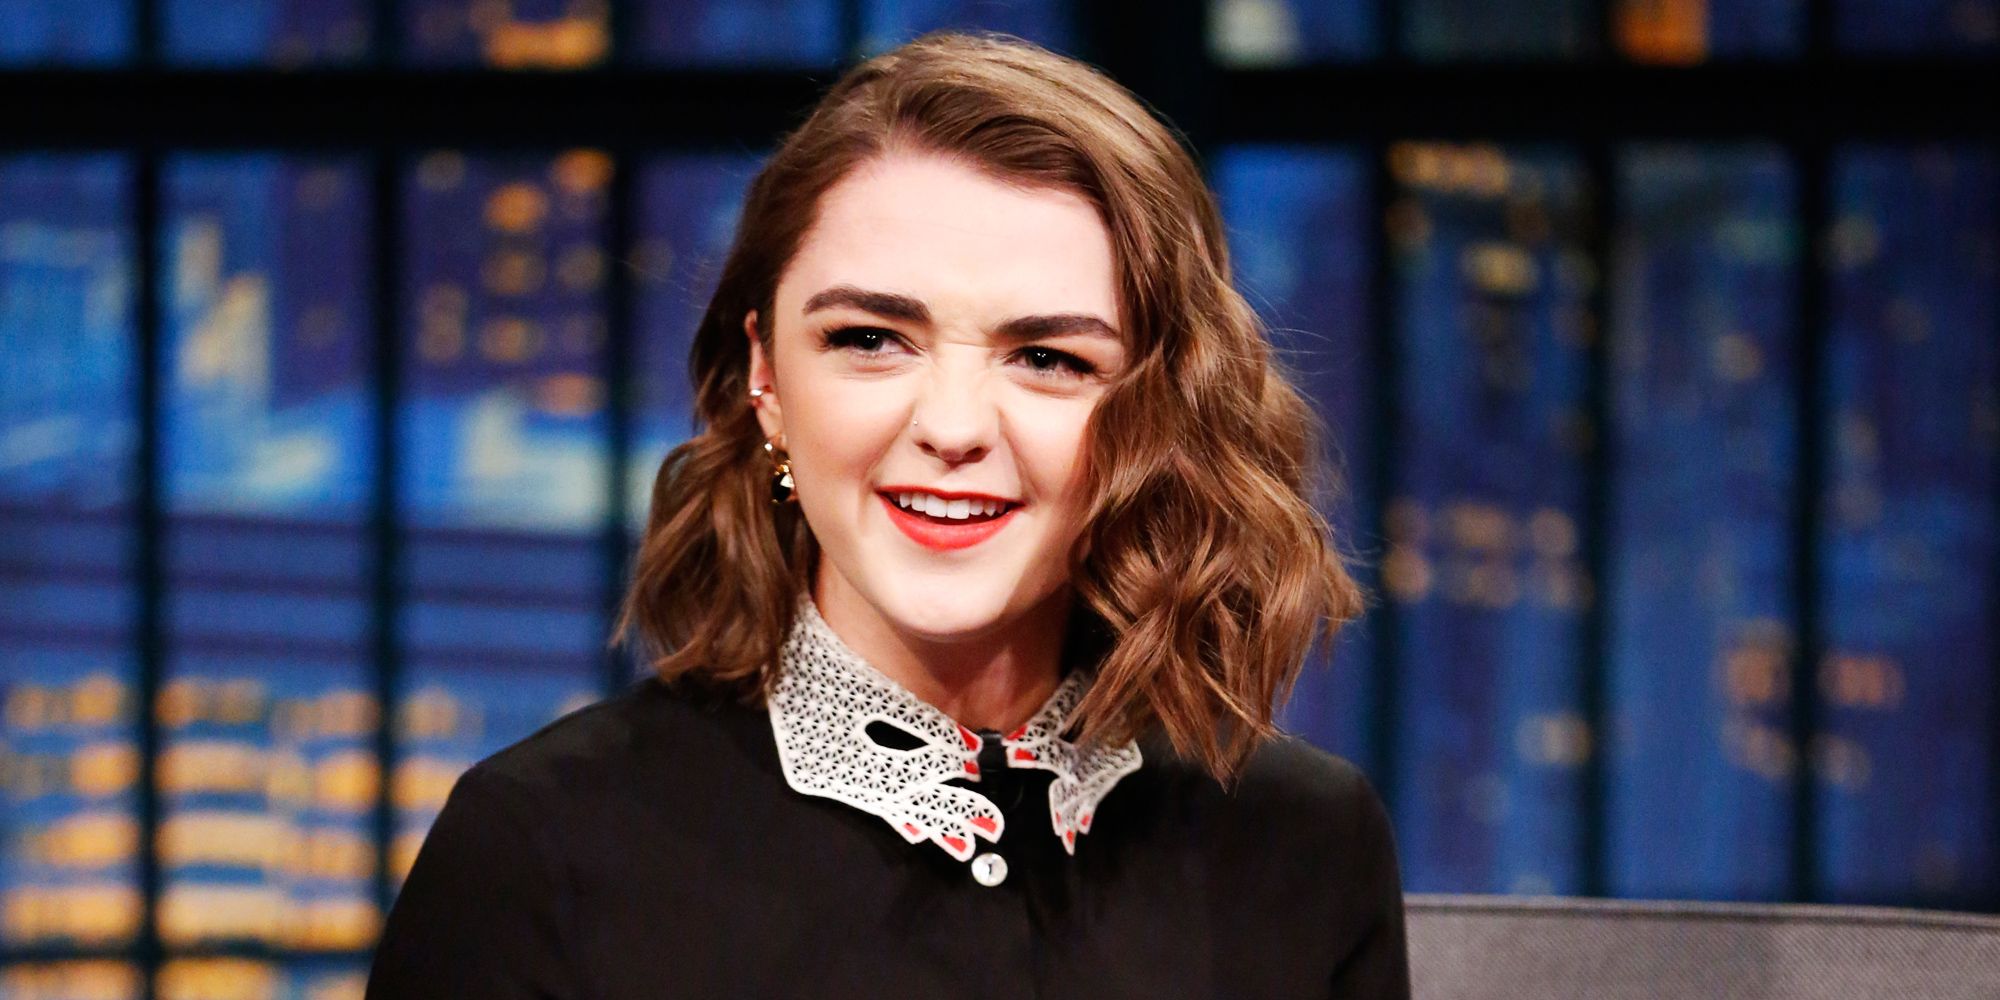 Maisie Williams Fake Supreme T-Shirt - Game of Thrones Actress Streetwear  Controversy